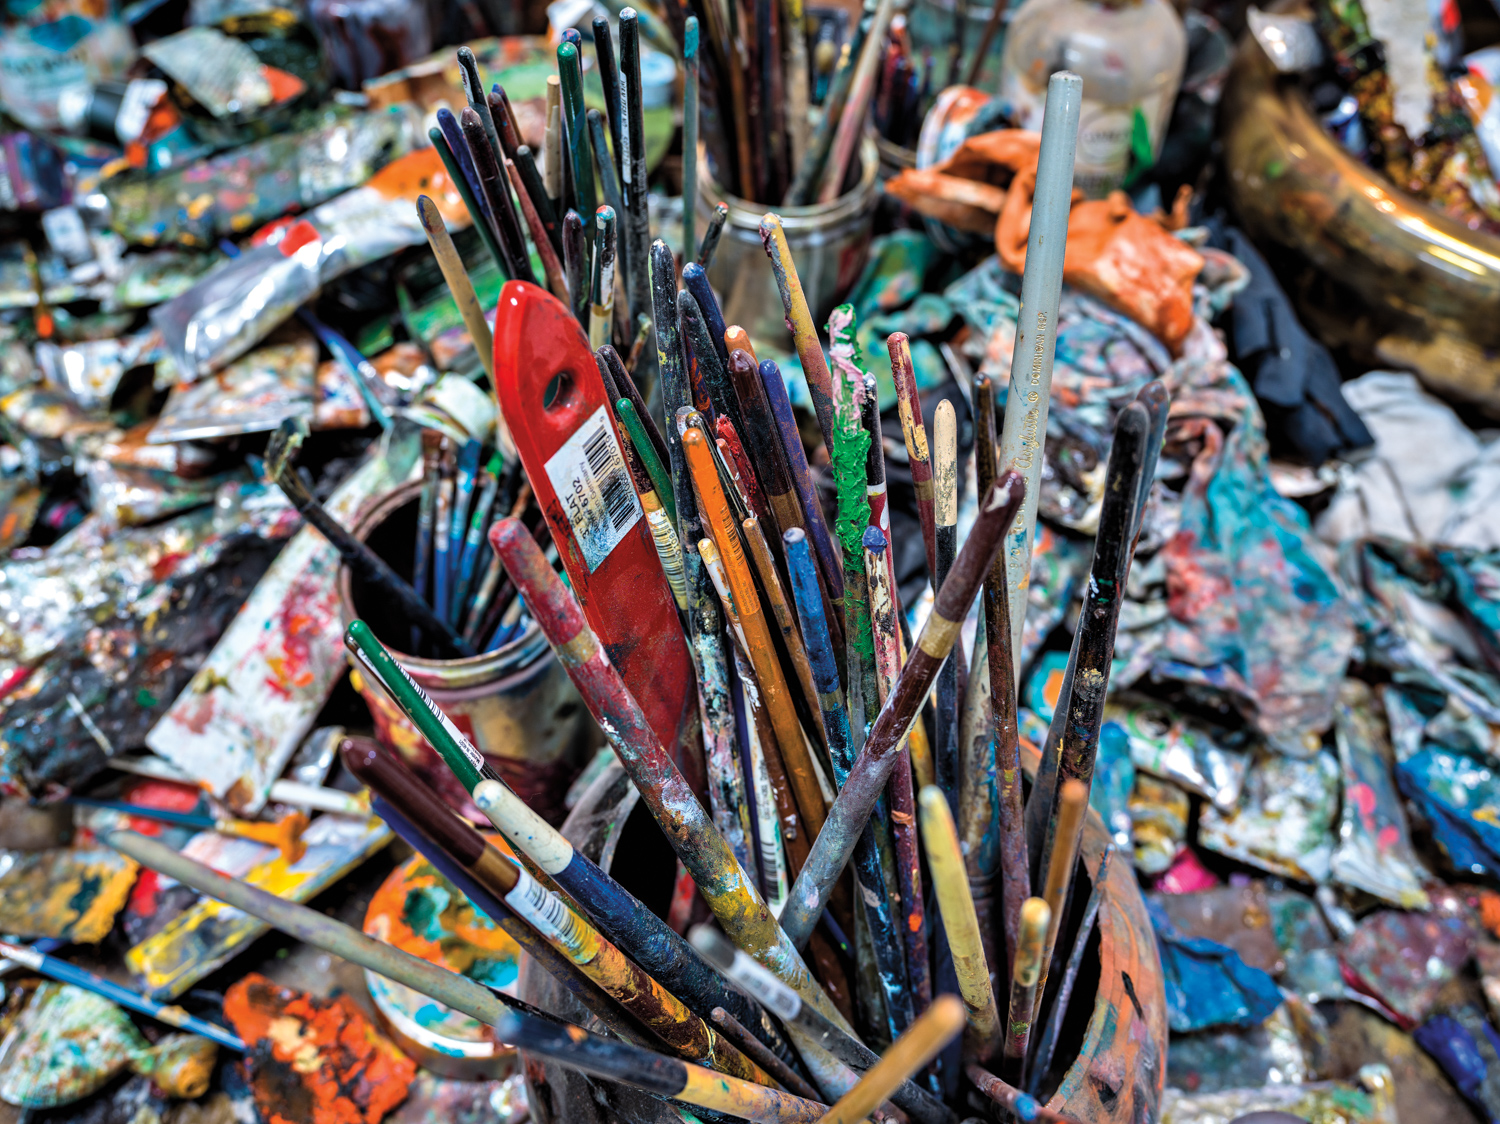 An artist workspace filled with an array of paintbrushes, razors, and palette knives